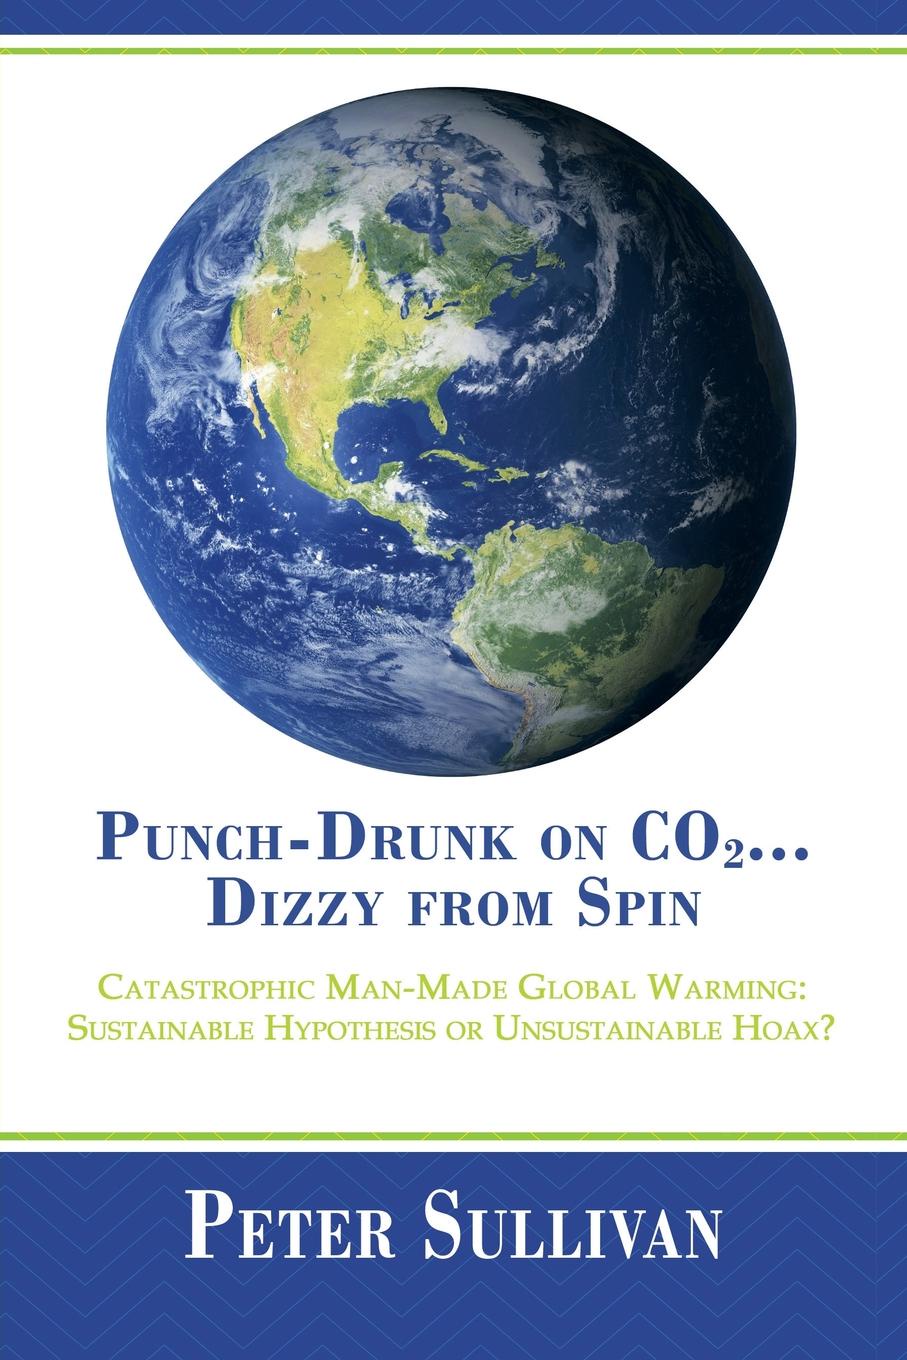 Punch-Drunk on Co2...Dizzy from Spin. Catastrophic Man-Made Global Warming Sustainable Hypothesis or Unsustainable Hoax?